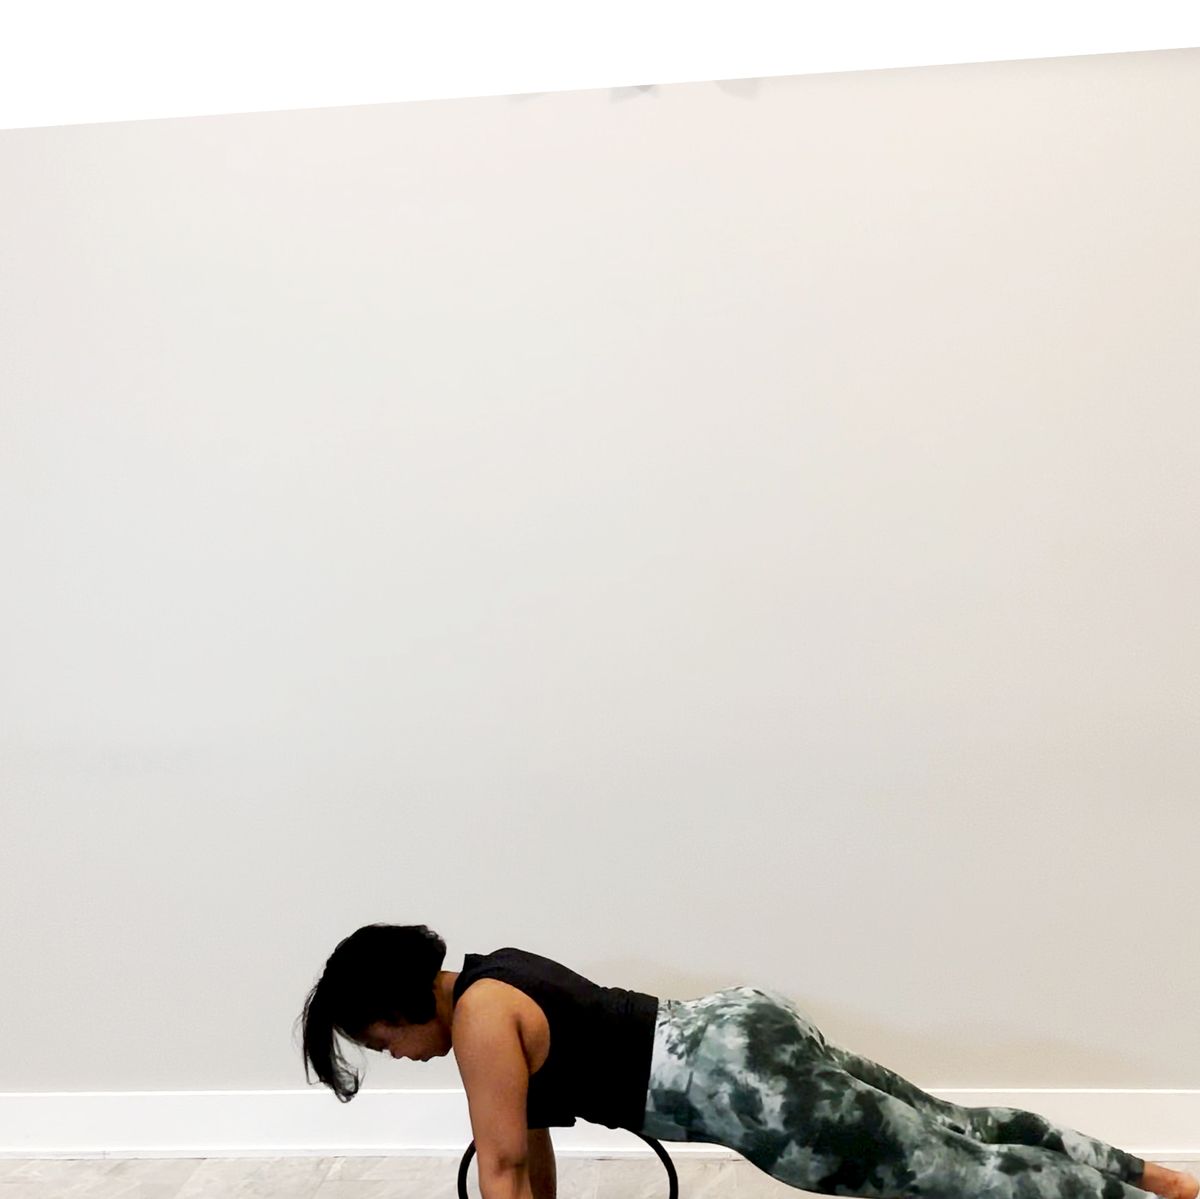 A 30-minute Standing Pilates Workout For Beginners That Focuses On